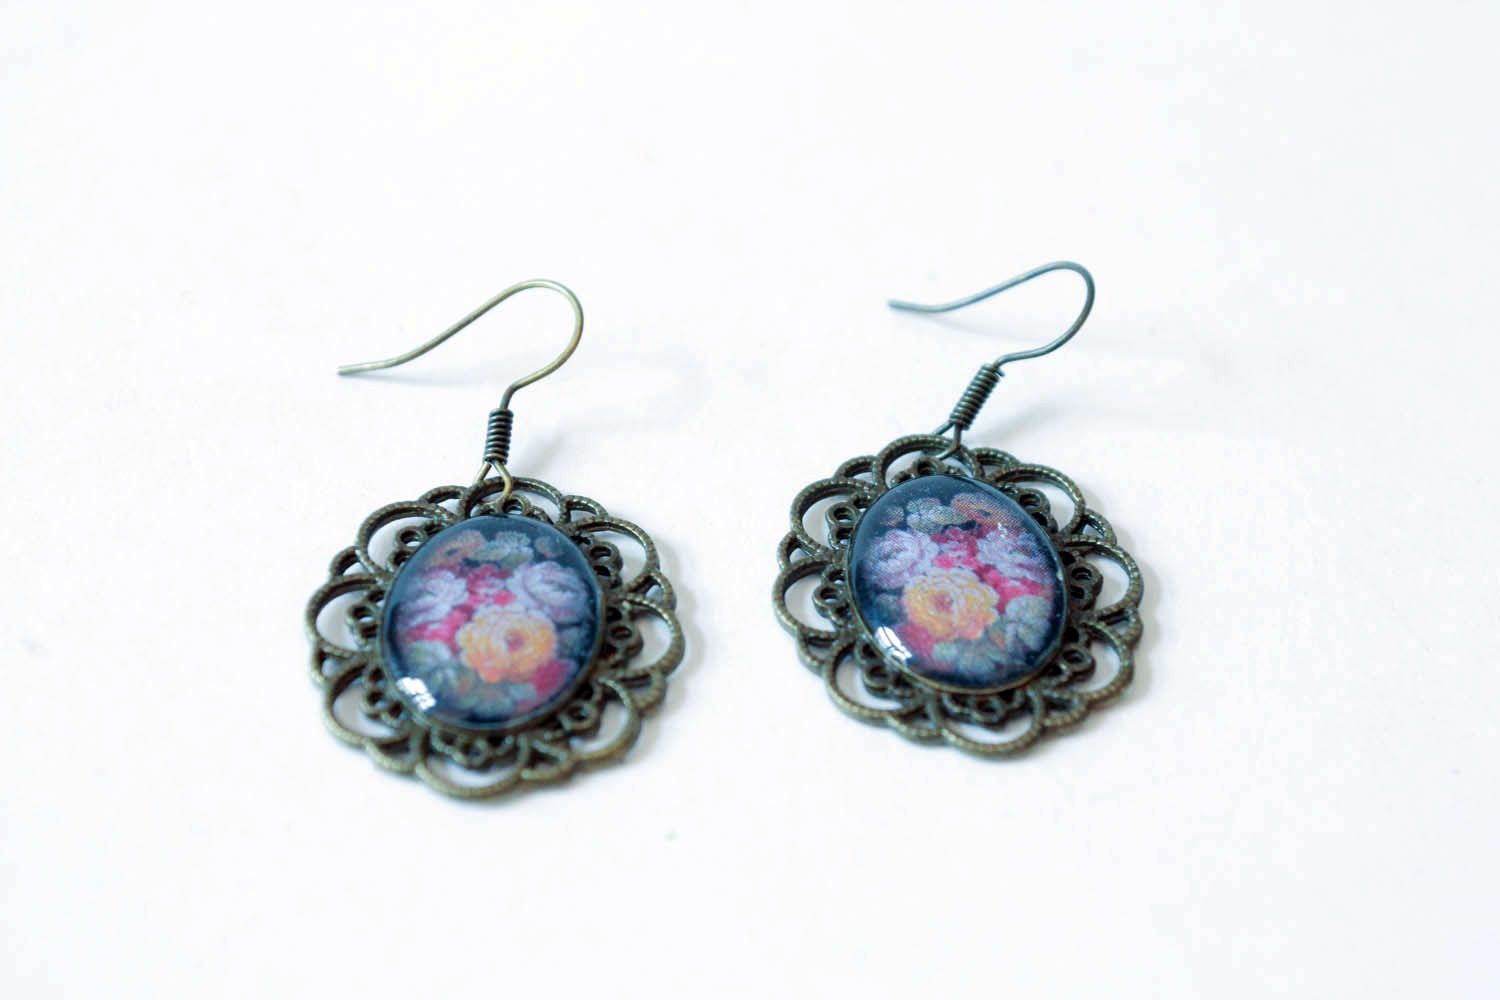 Earrings with lace trimming photo 3